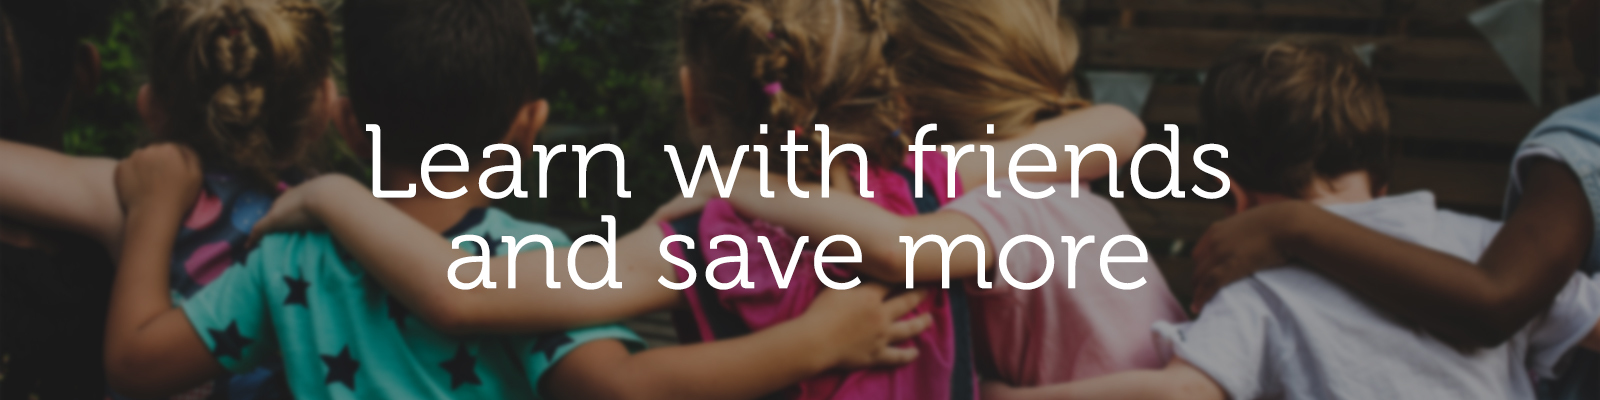 Learn with friends and save more.